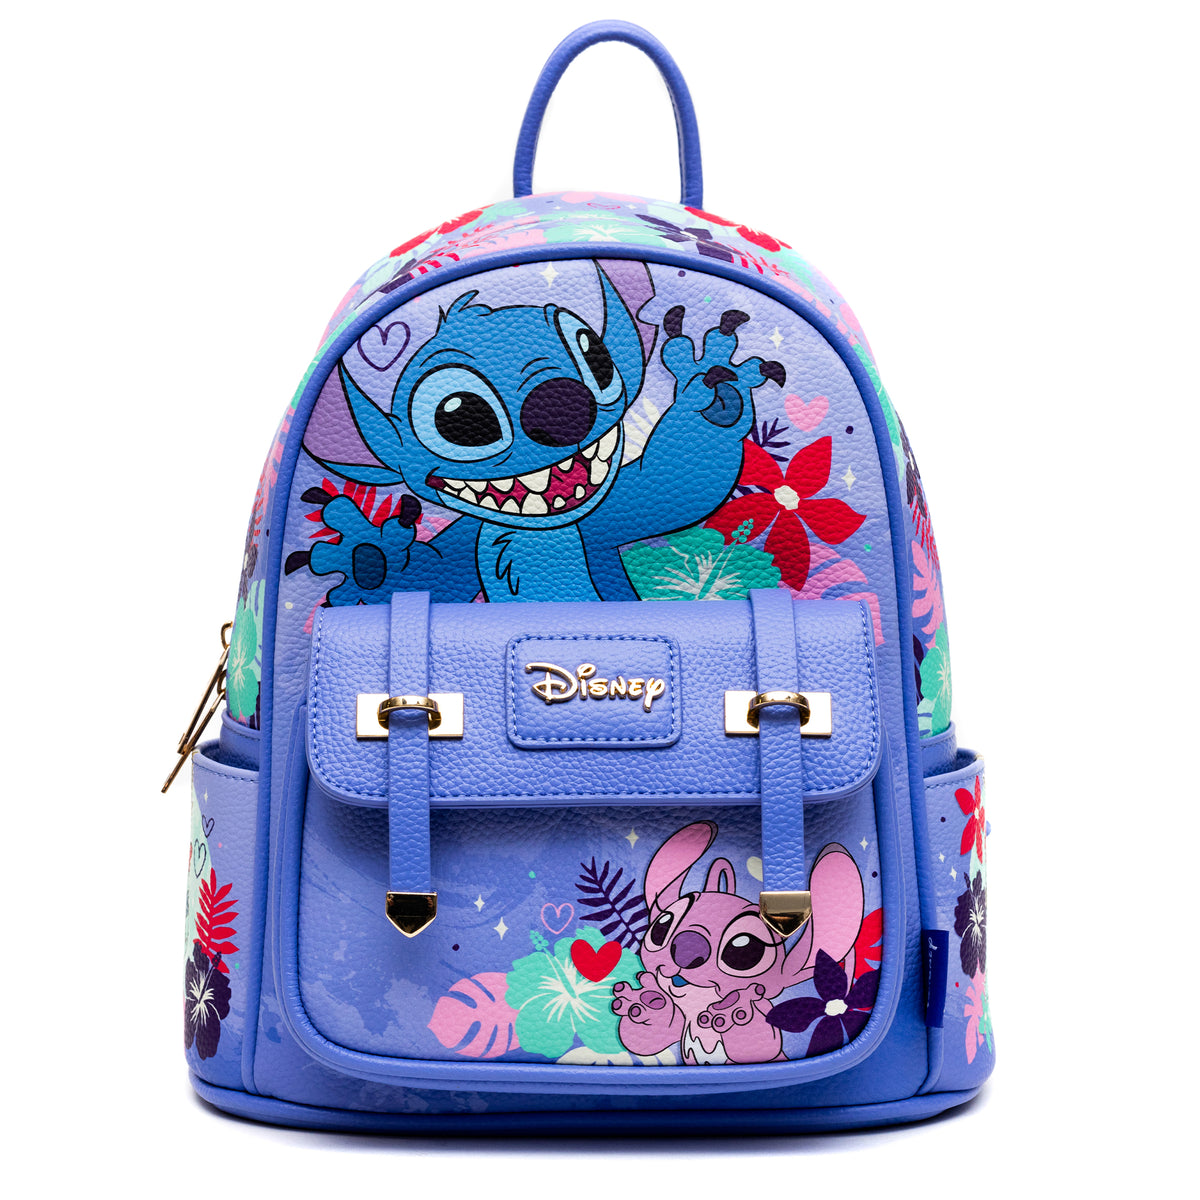 WondaPOP LUXE - Disney Stitch Mini Backpack - Limited Edition - NEW RELEASE